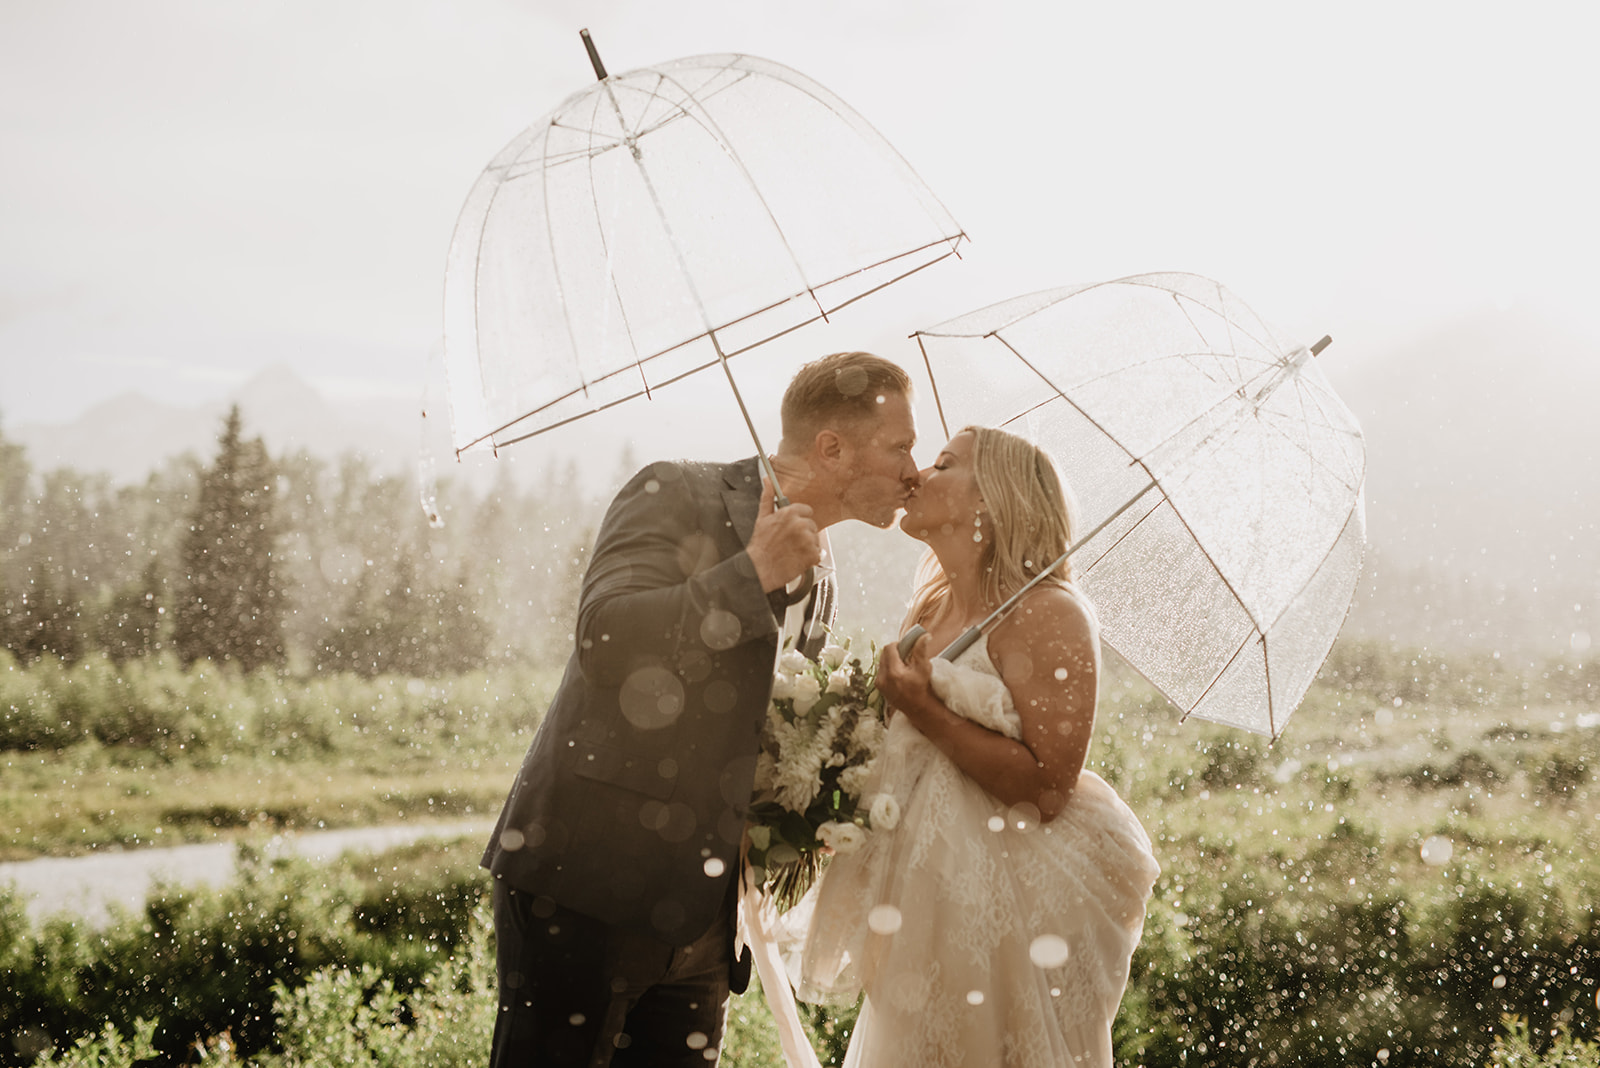 bride and groom kissing as the rain comes down on them and the sun shines through the clouds taken by Jackson Hole photographer